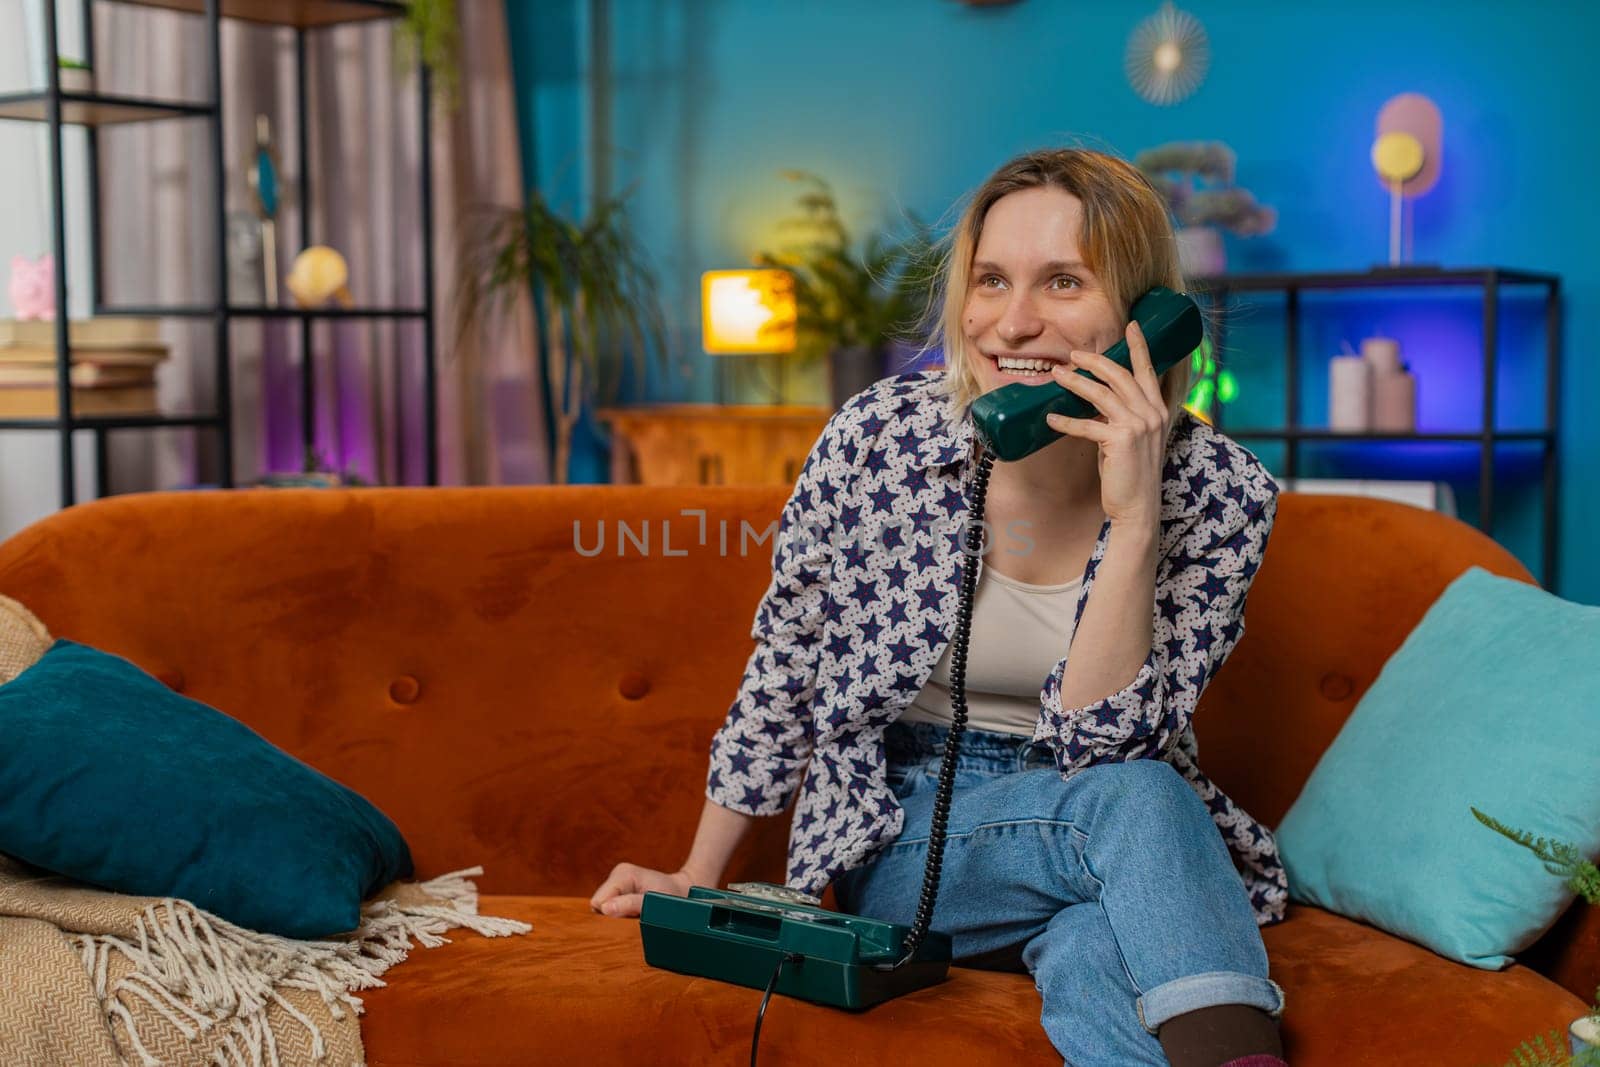 Smiling young woman making wired telephone call conversation with friends sitting on home couch by efuror